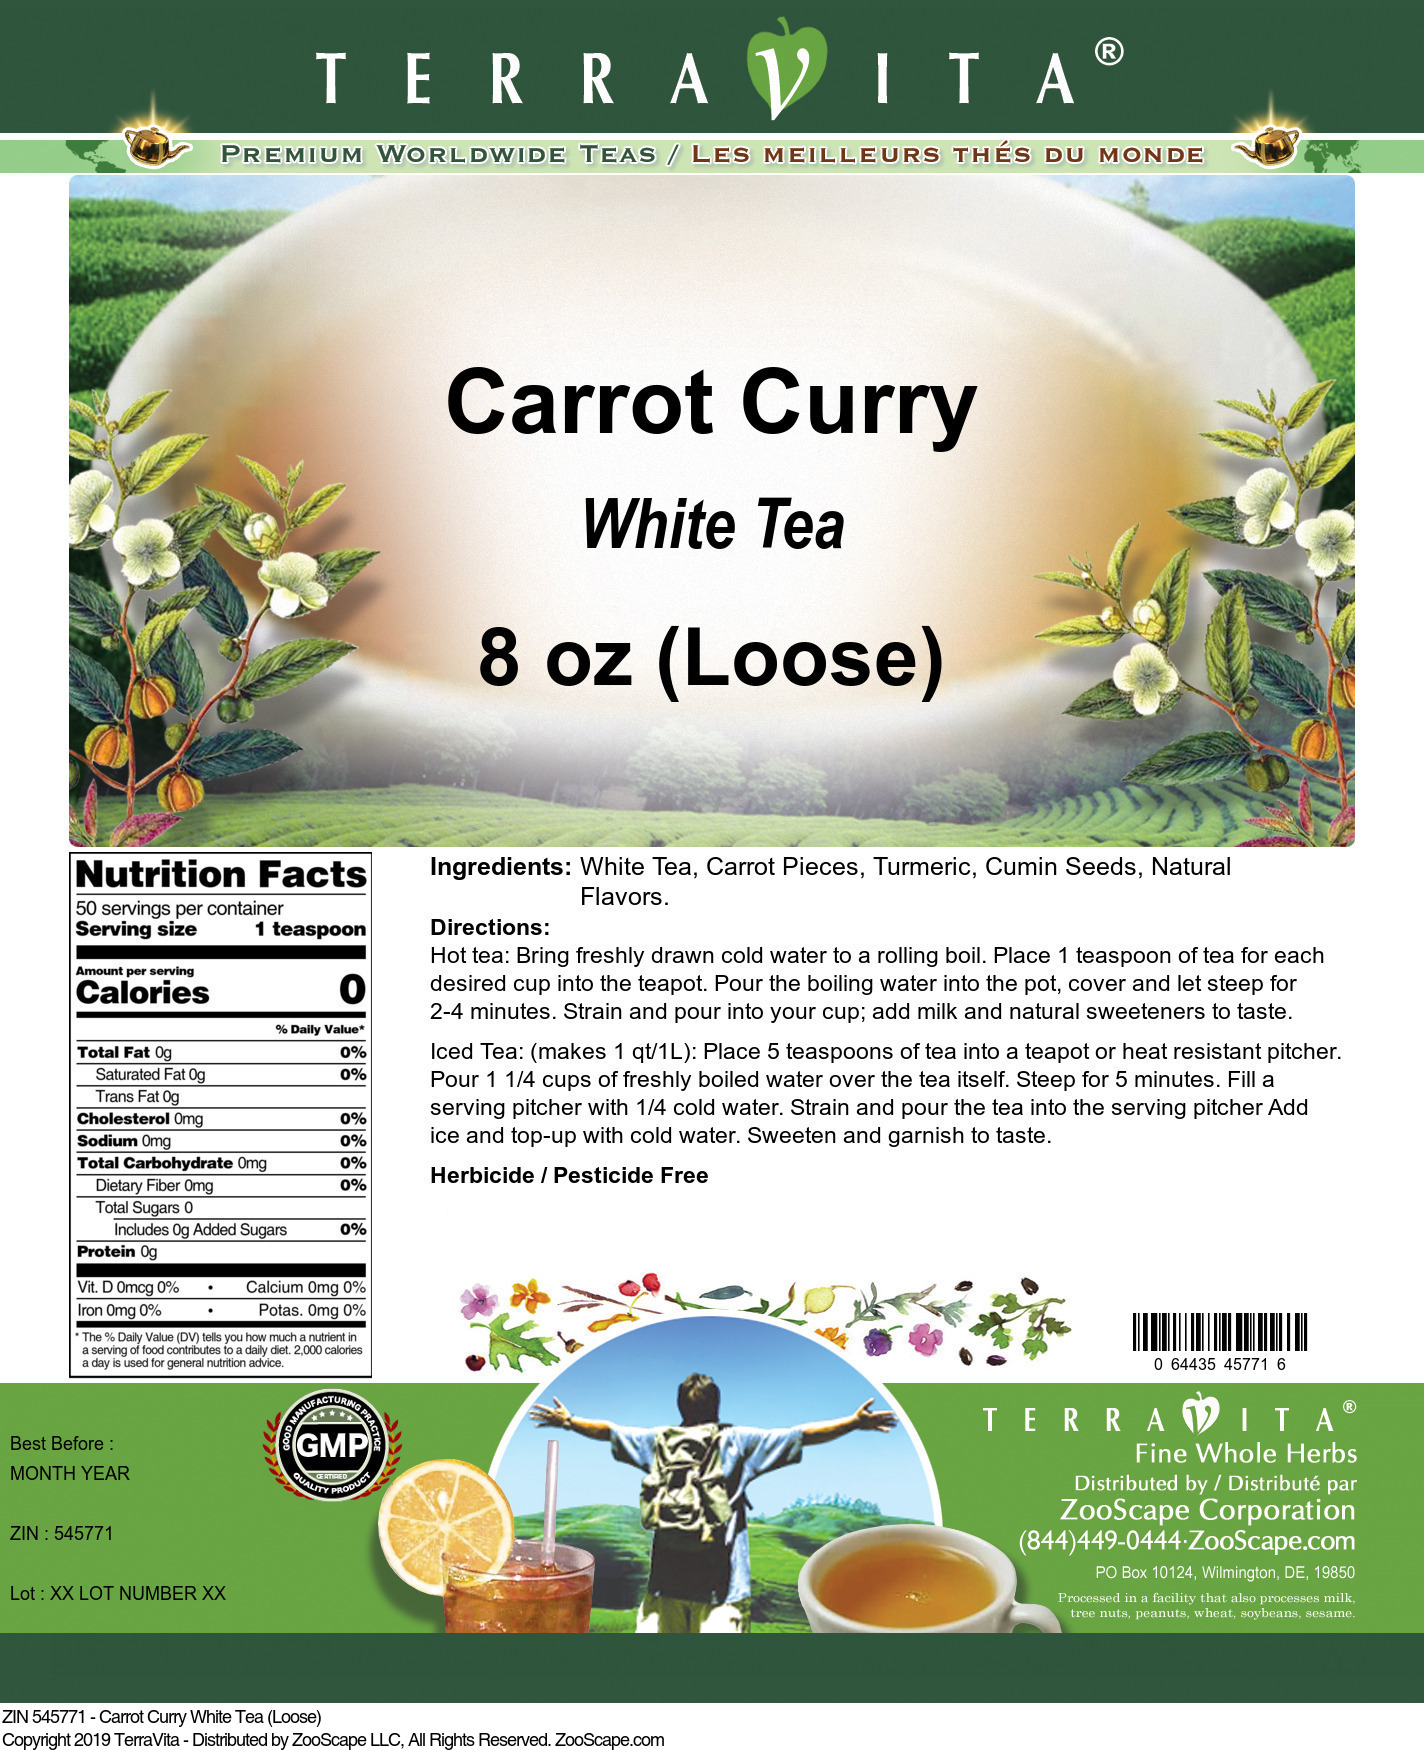 Carrot Curry White Tea (Loose) - Label